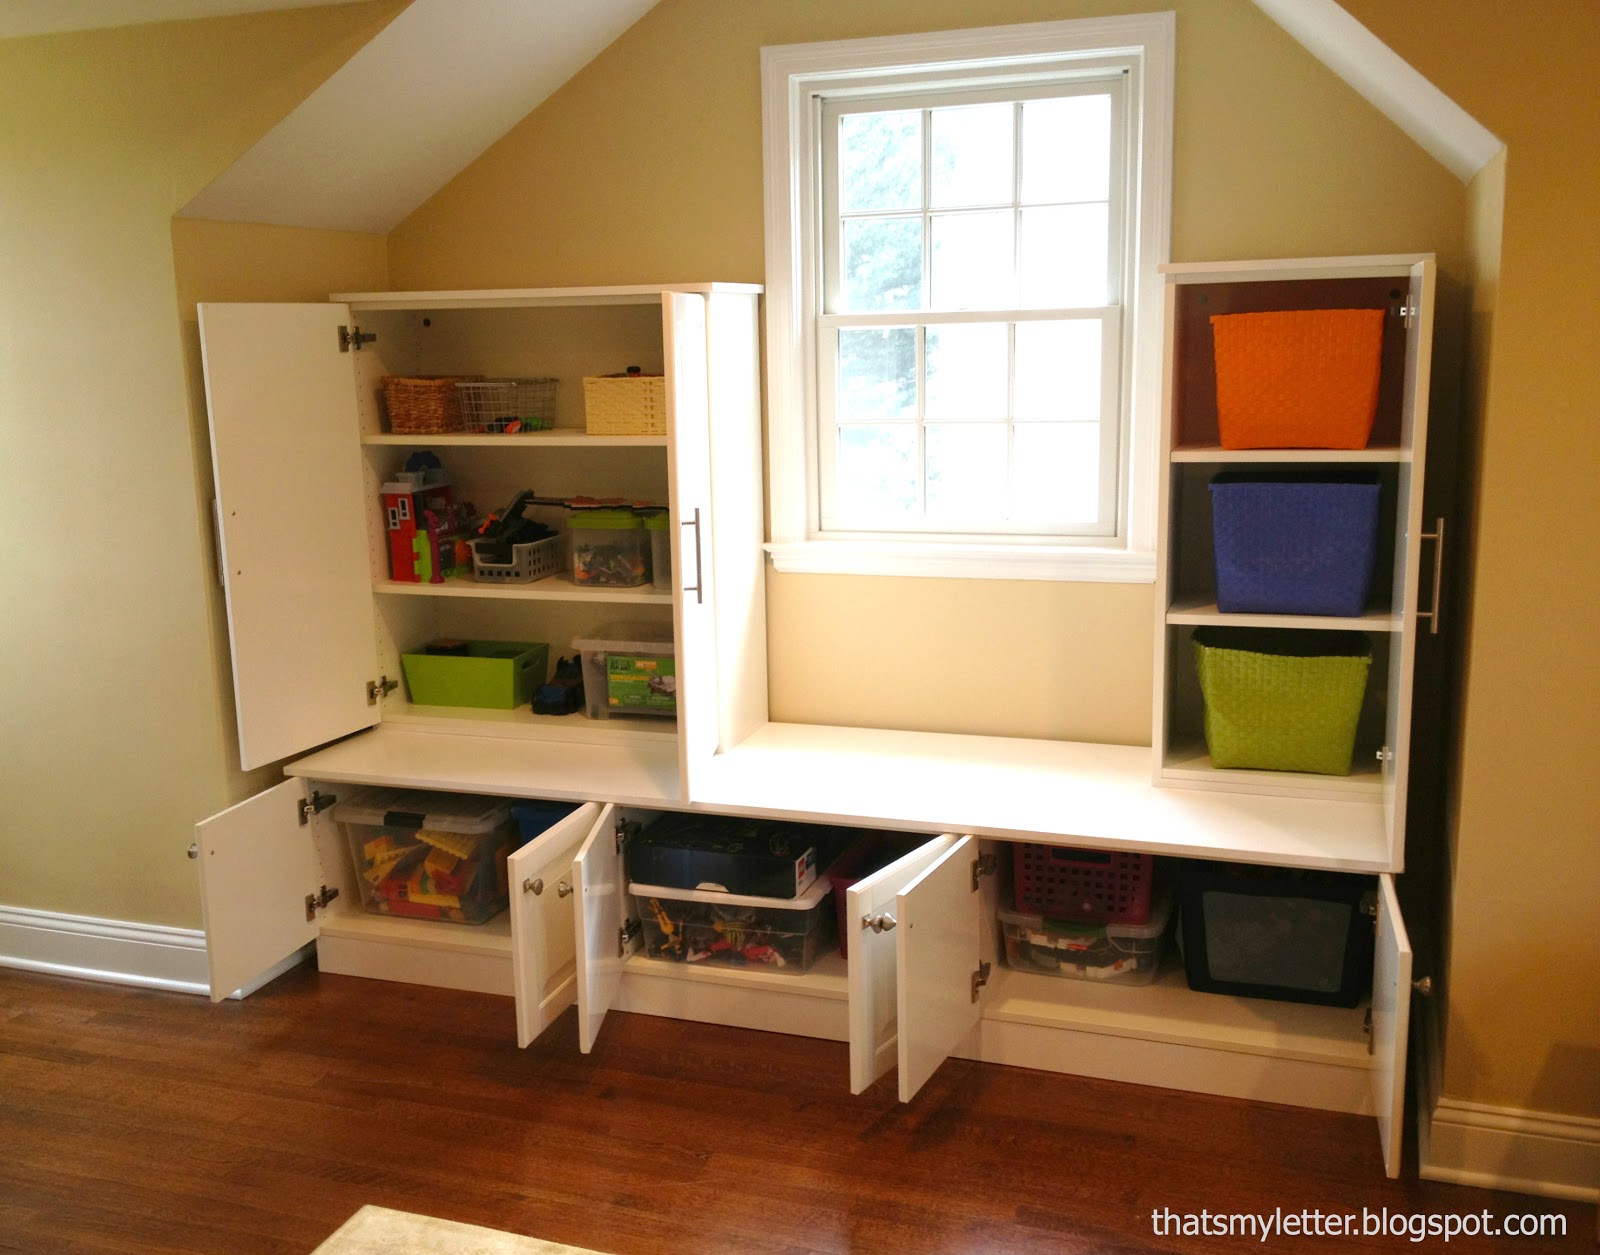 DIY Playroom Built Ins from Ikea Cabinets - Jaime Costiglio